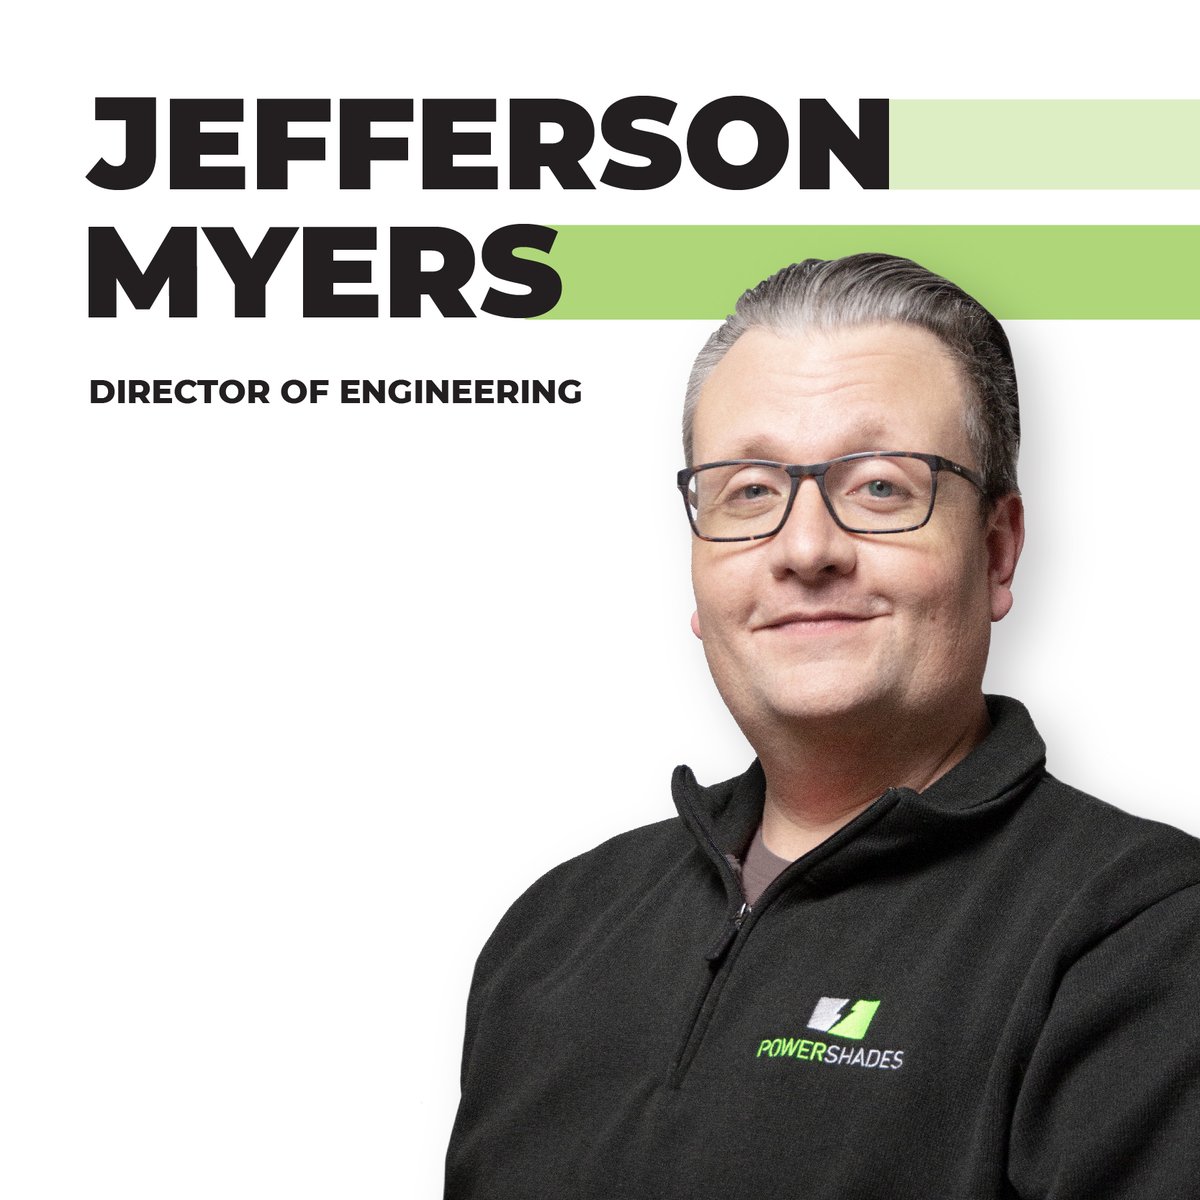 Today, we shine the spotlight on one of the guiding lights at PowerShades - our Director of Engineering, Jefferson Myers. His dedication and expertise push the boundaries of what's possible, making every day at PowerShades a journey of discovery. #EngineeringGenius